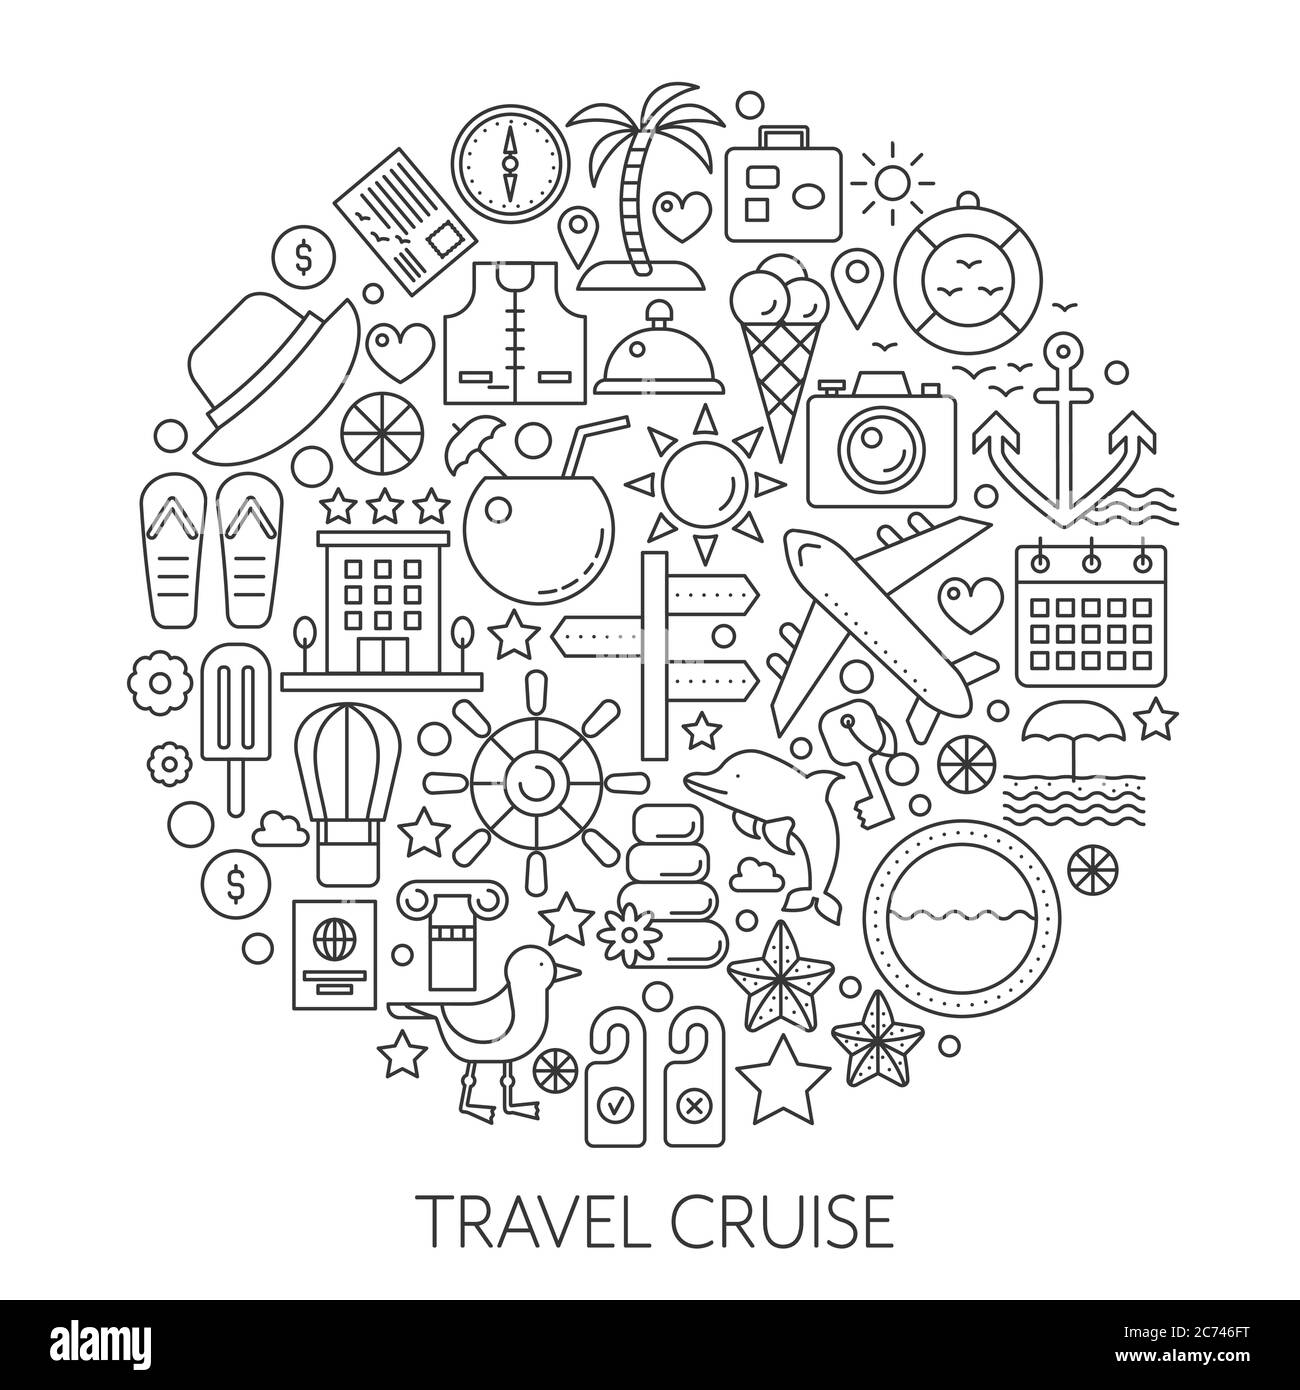 Travel cruise thin line vector concept illustration. Voyage vacation traveling stroke outline poster, template for web Stock Vector